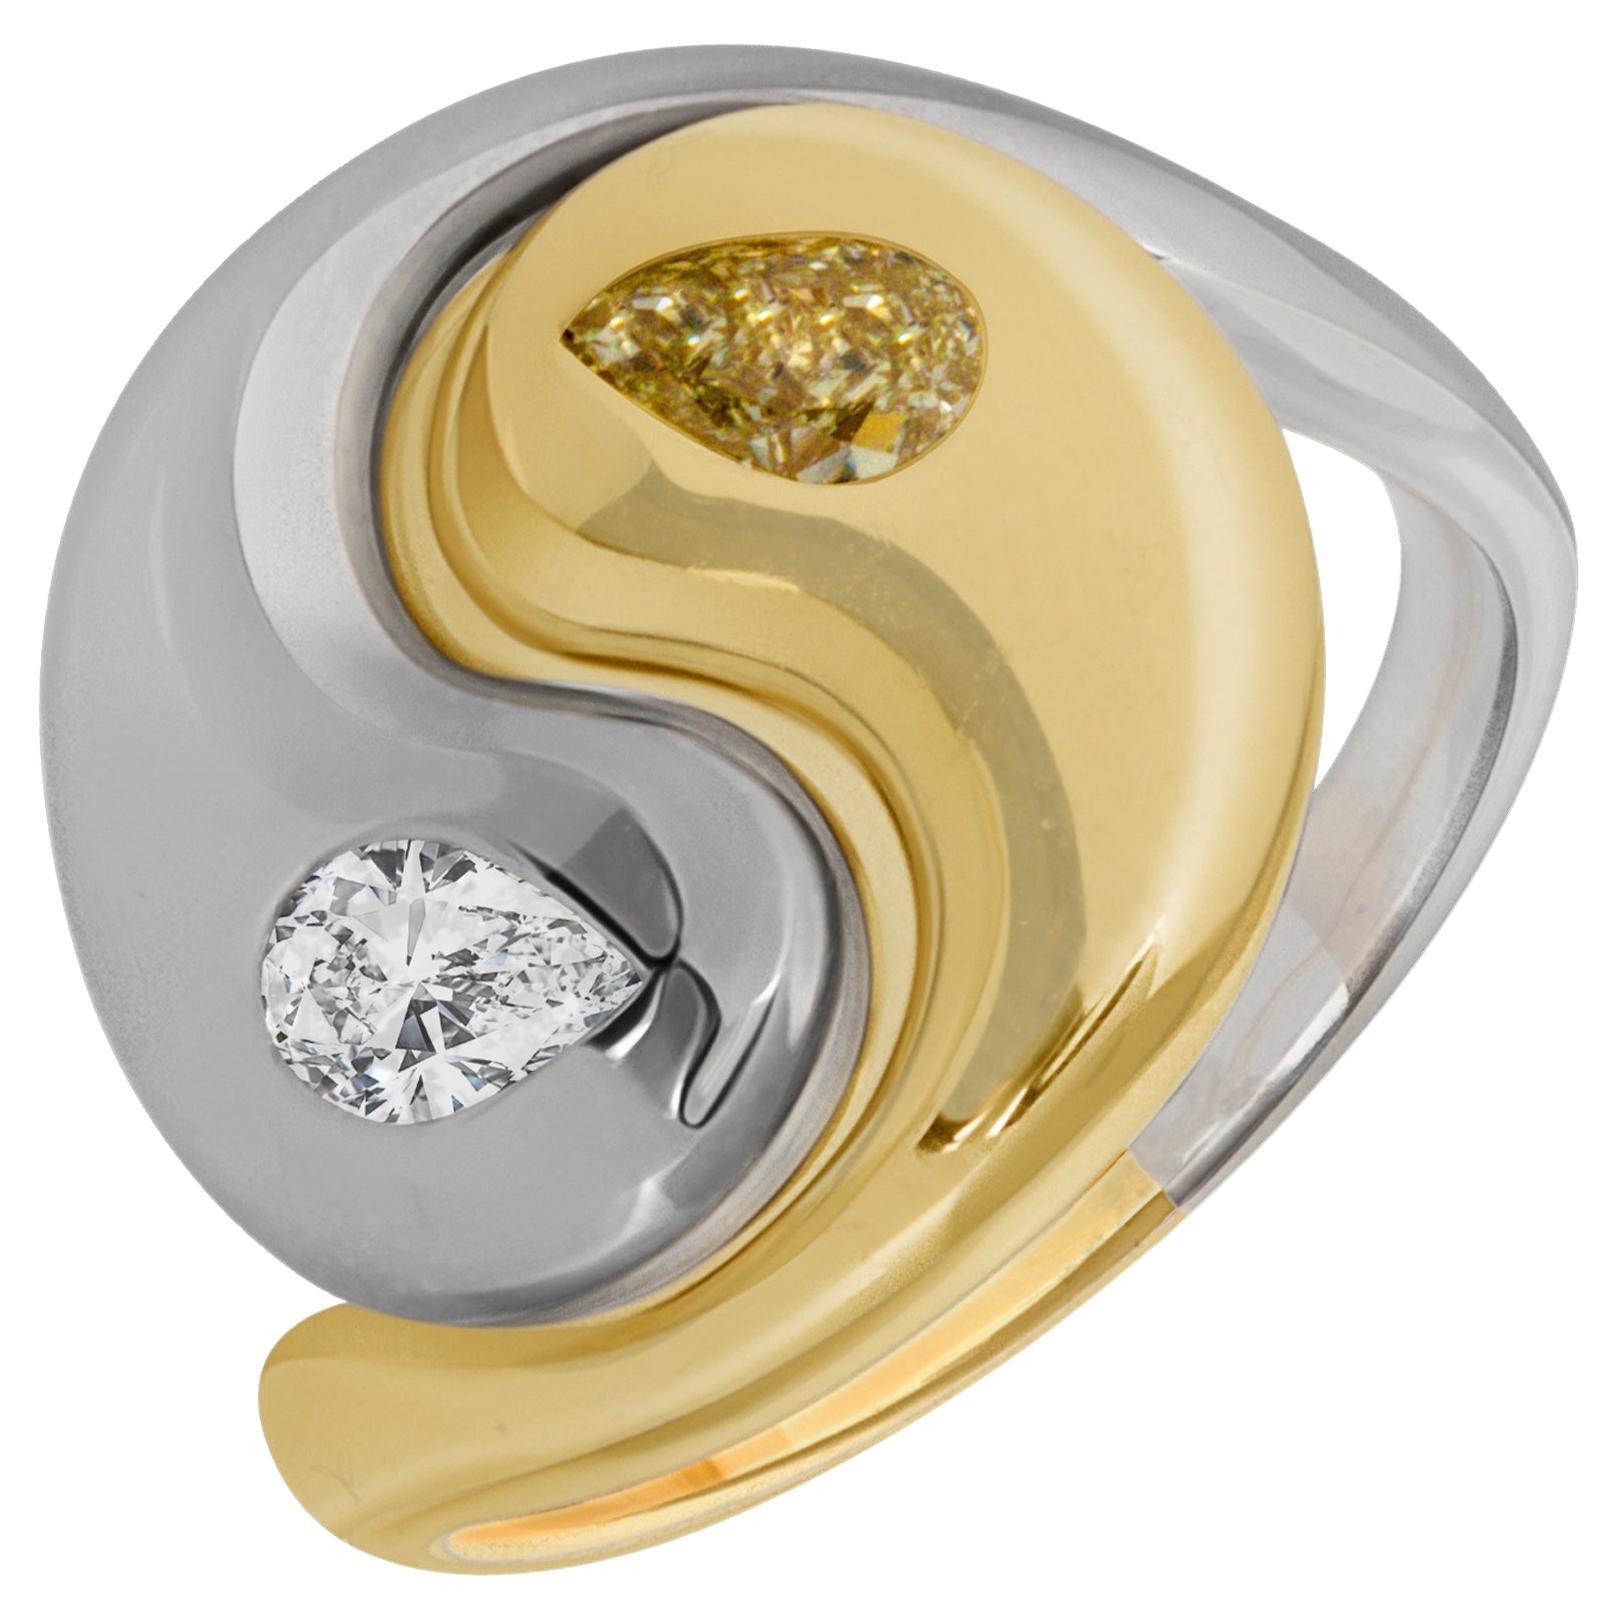 For Sale:  Two Tone Gold Ring with Fanc Shape Diamond and Fancy Yellow Canary Diamond Pear